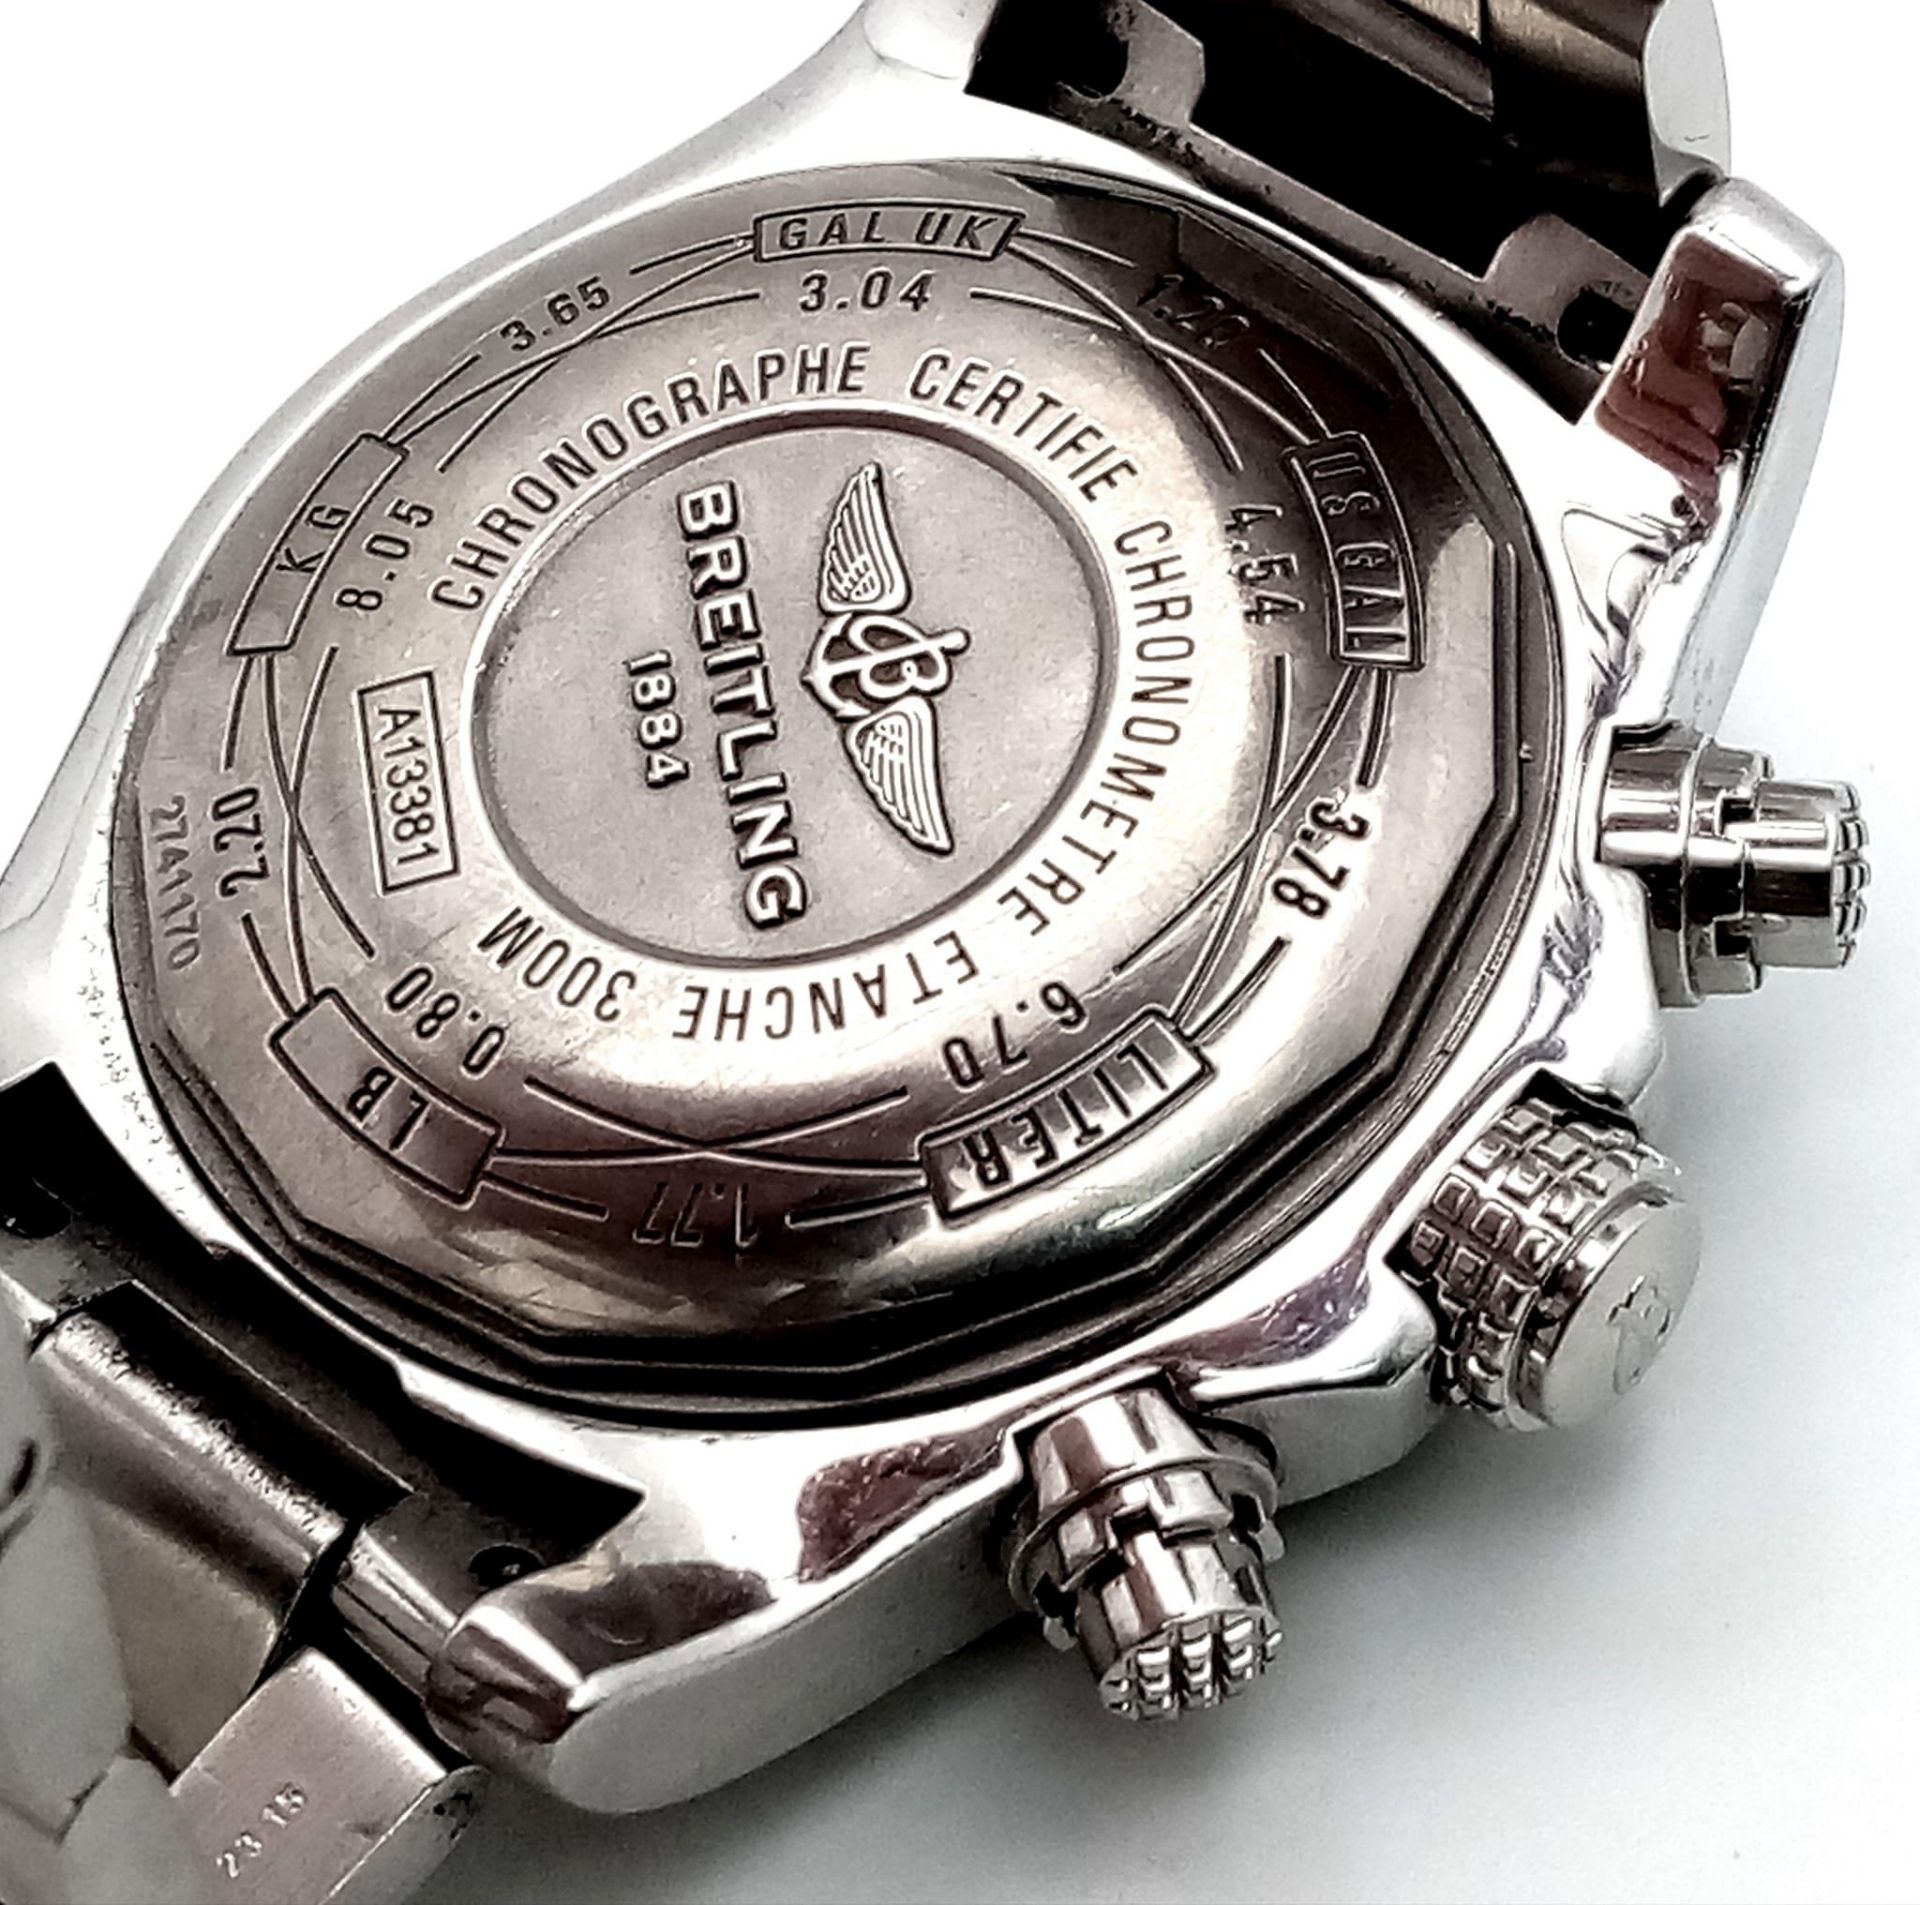 A Breitling Avenger II Chronograph Gents Watch. Stainless steel bracelet and case - 43mm. Black dial - Bild 5 aus 11